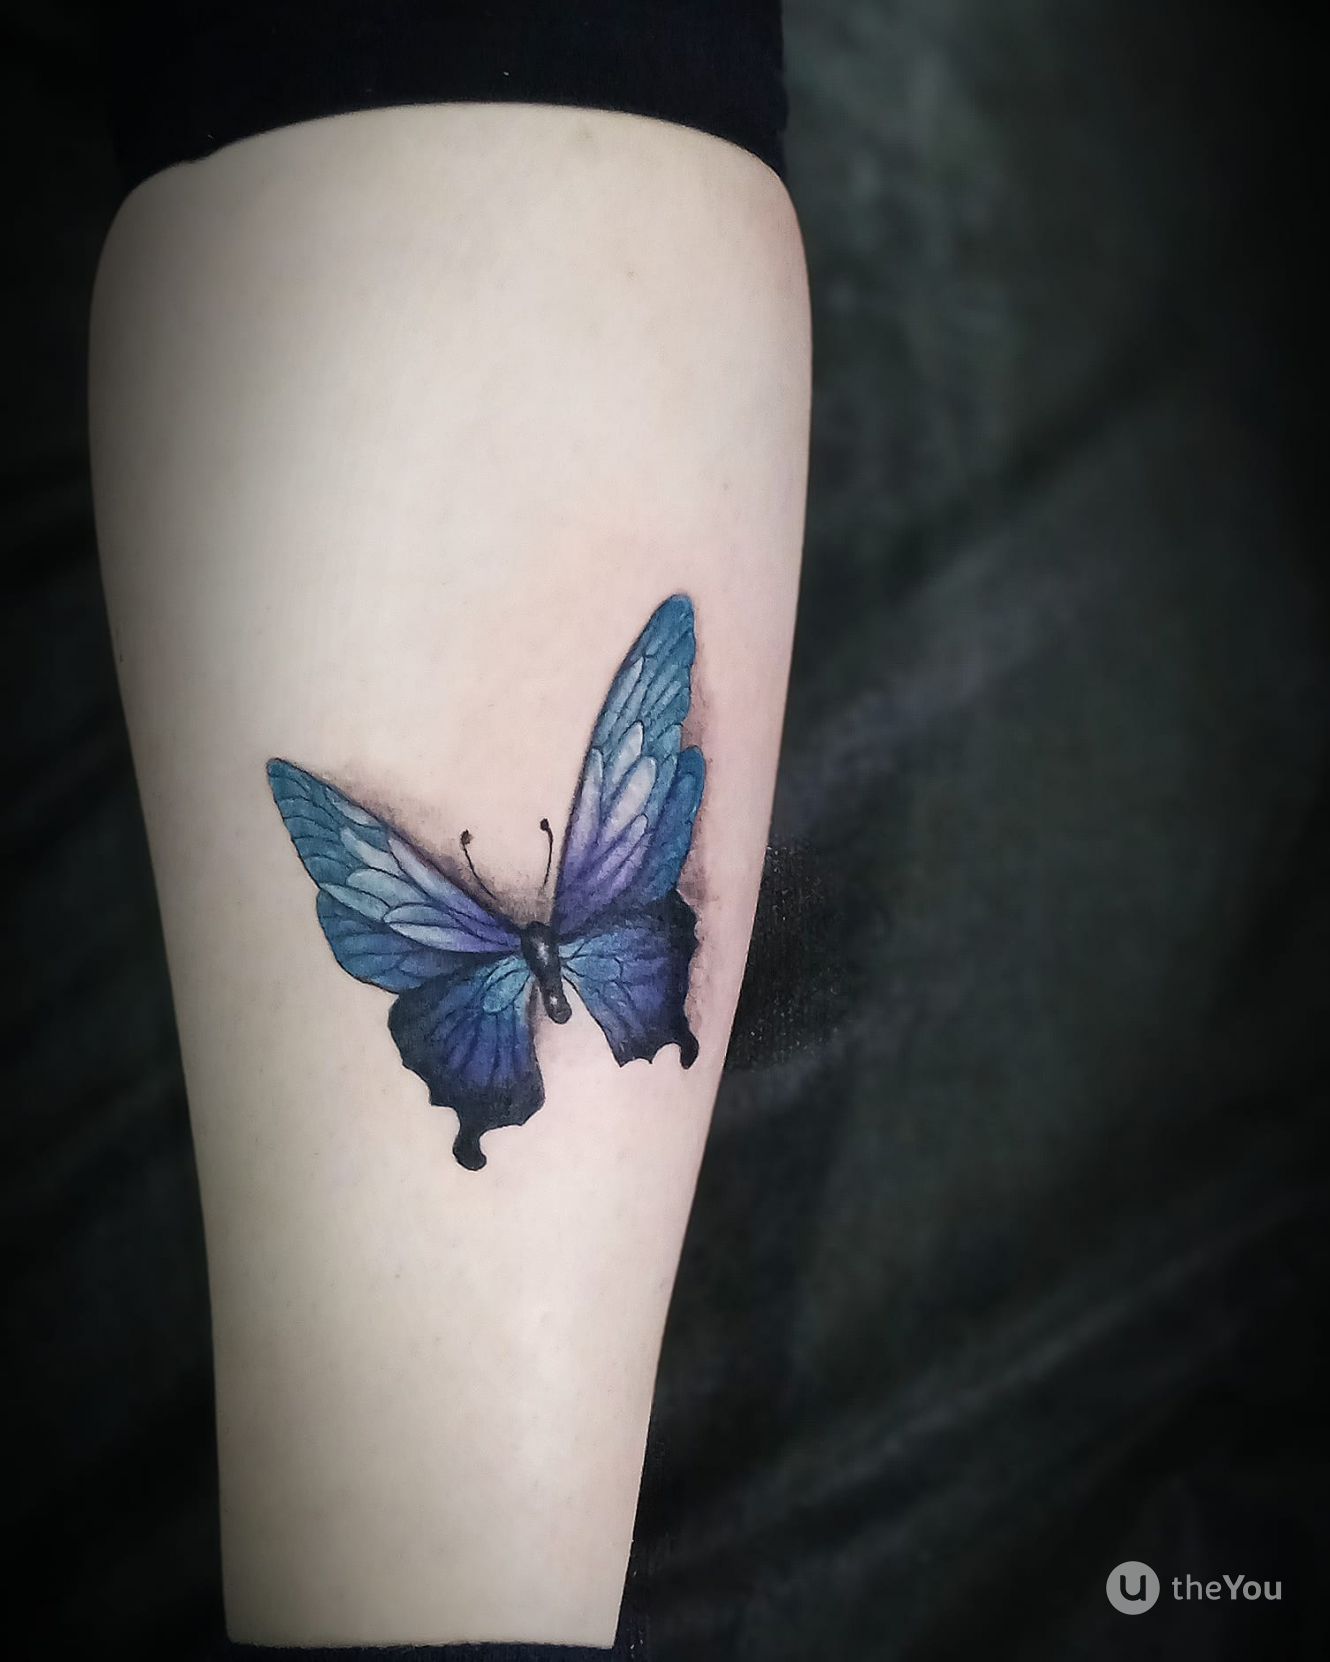 Butterfly Image Ideas for Women - Arm or Thigh Tattoo